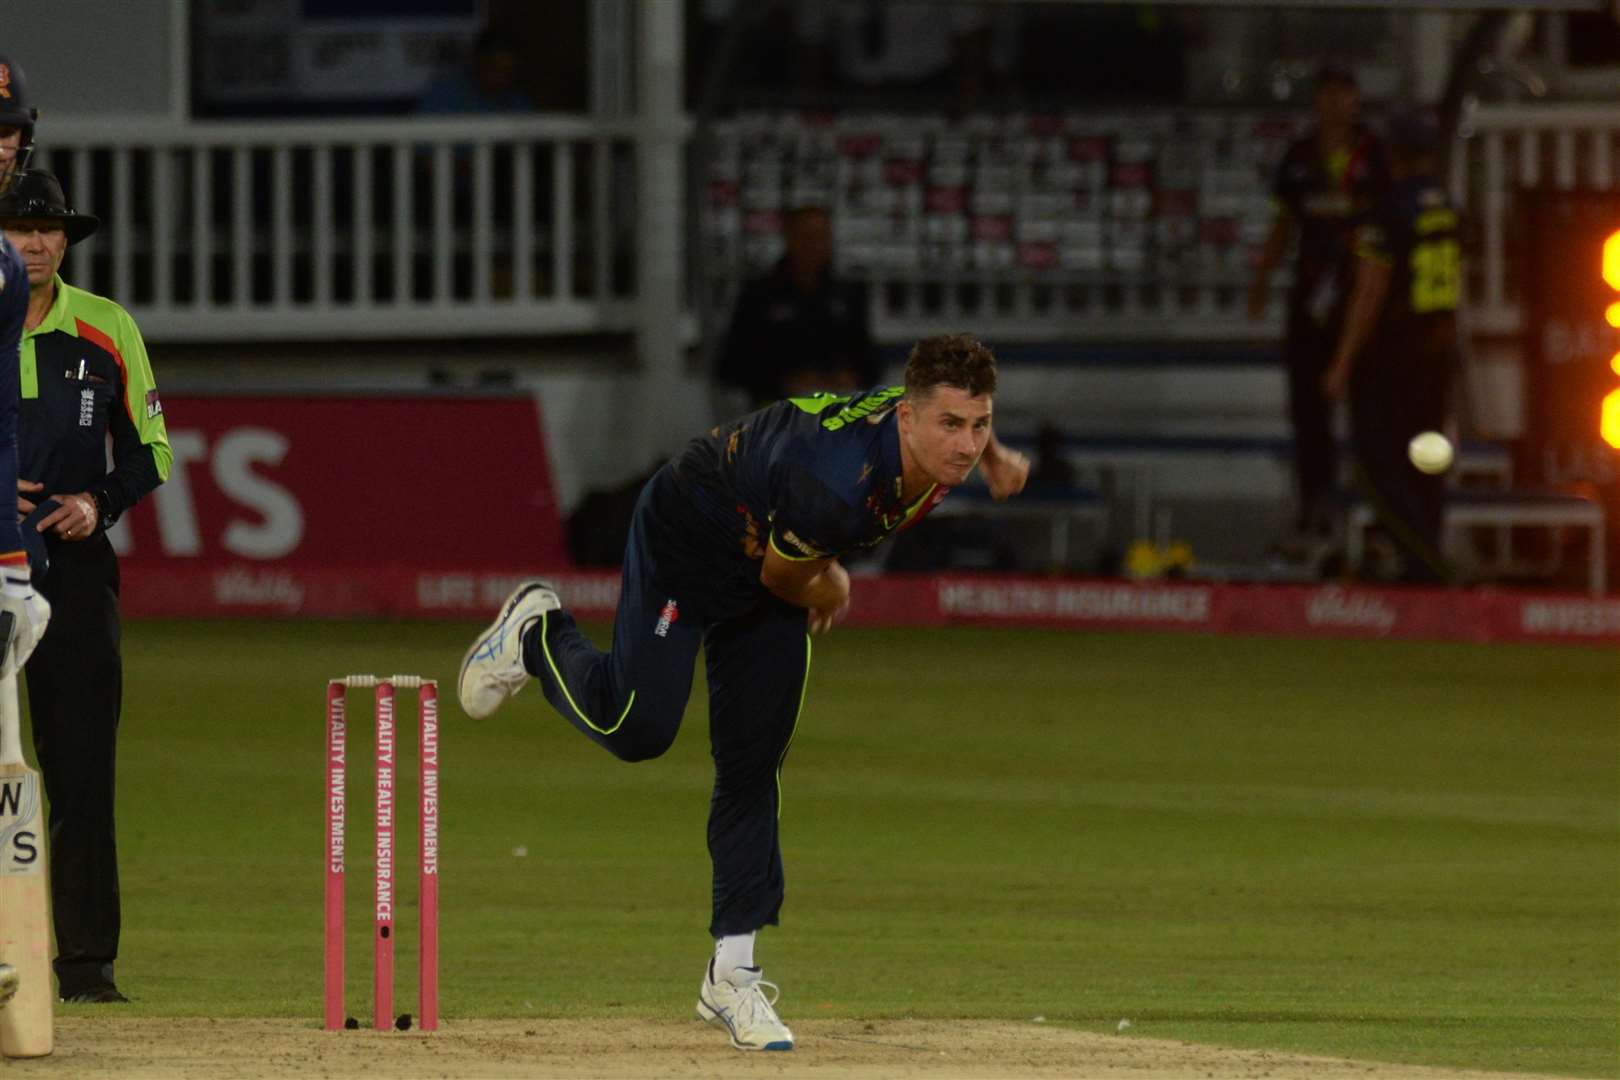 Marcus Stoinis bowling against Essex. Picture: Chris Davey.